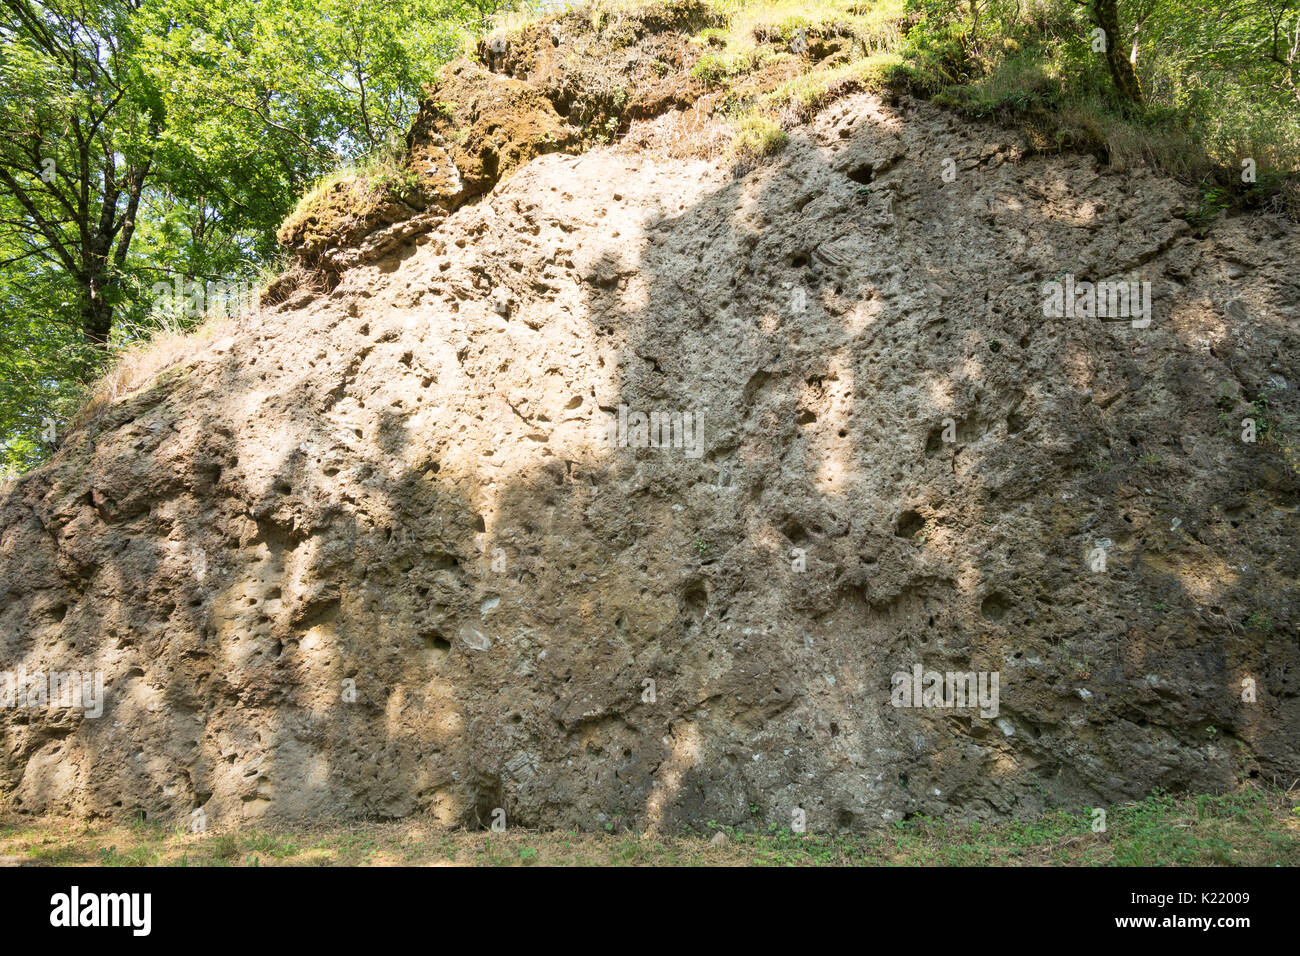 Impact breccia following asteroid impact, Rochechouart, Nouvelle-Aquitaine, France,Europe Stock Photo